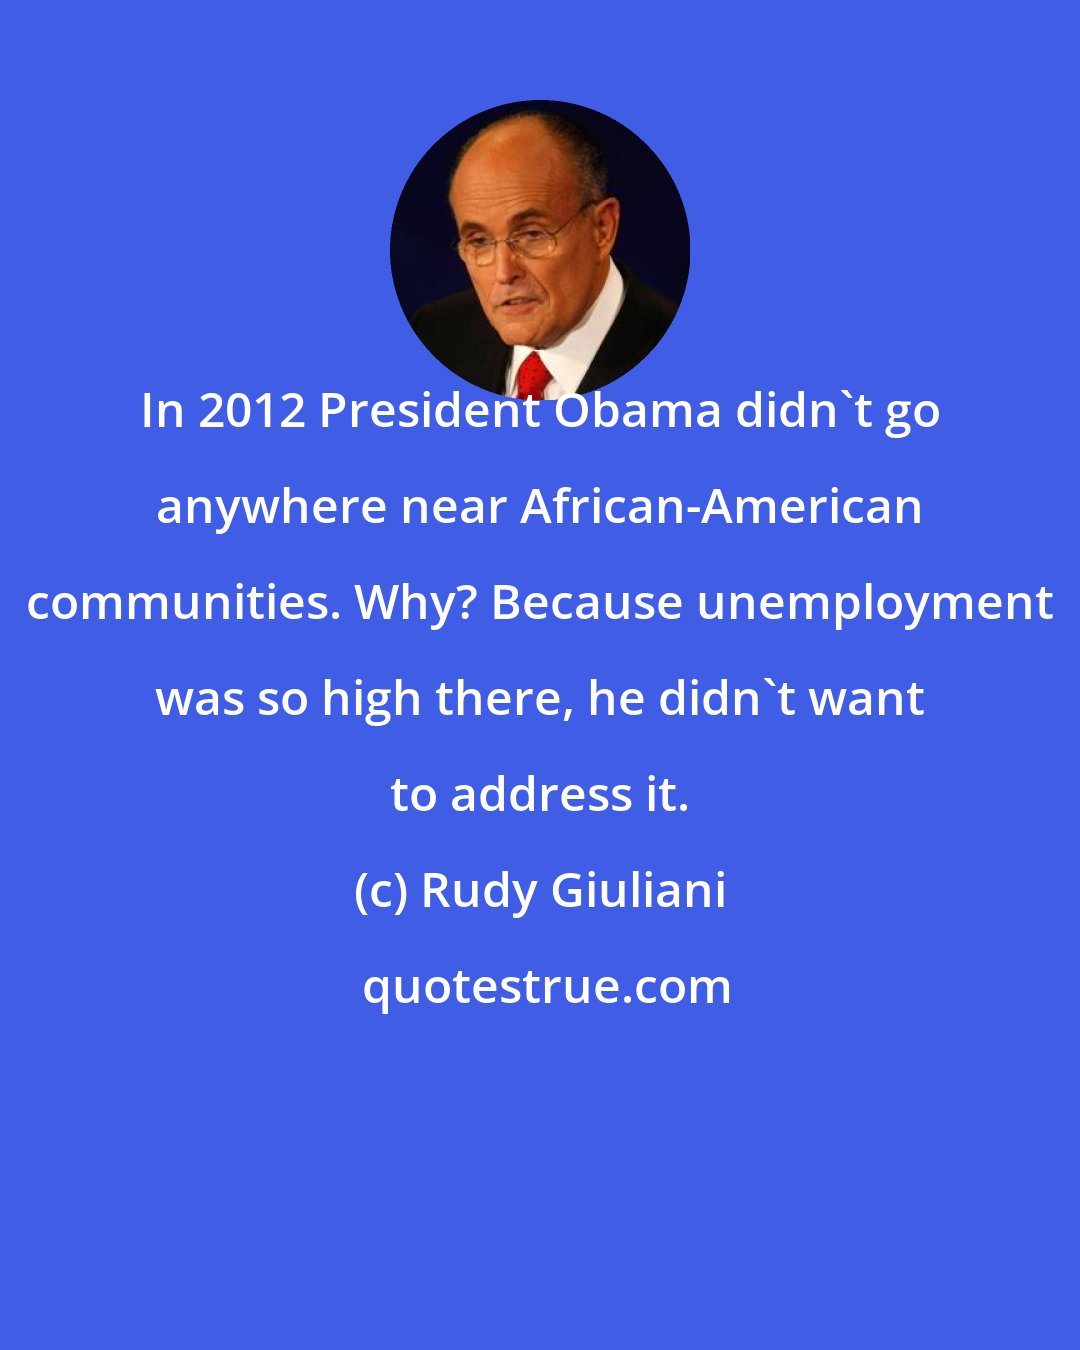 Rudy Giuliani: In 2012 President Obama didn't go anywhere near African-American communities. Why? Because unemployment was so high there, he didn't want to address it.